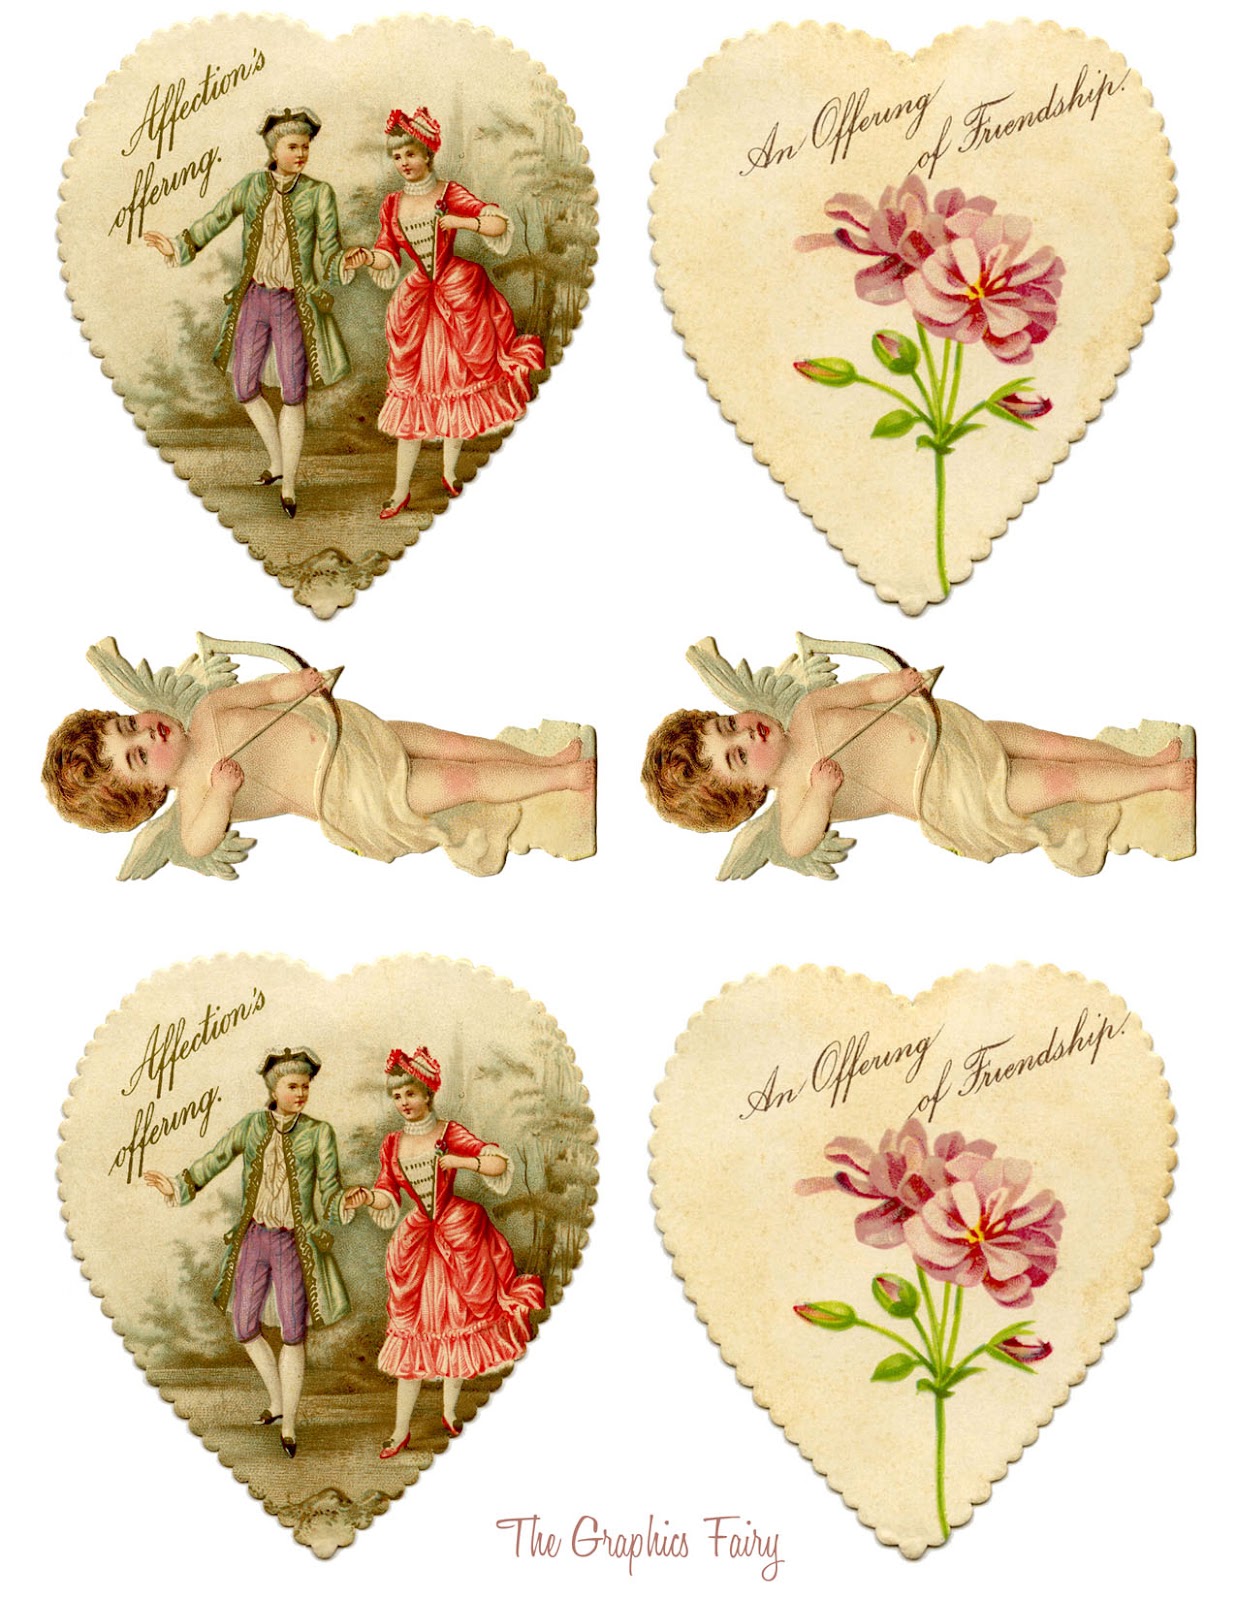 Vintage Valentine Printable - Heart Garland with Cupids - The Graphics Fairy